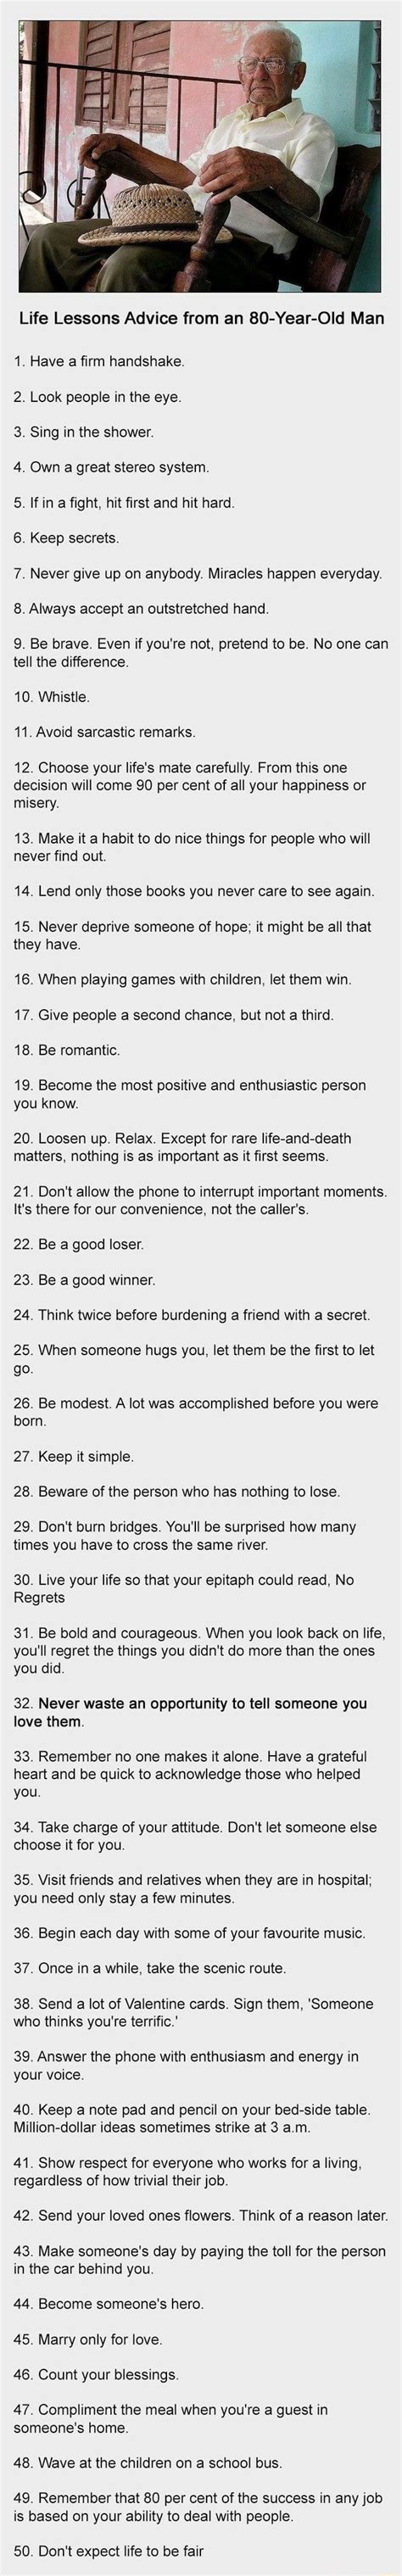 life lessons advice from an 80 year old man 1 have a firm